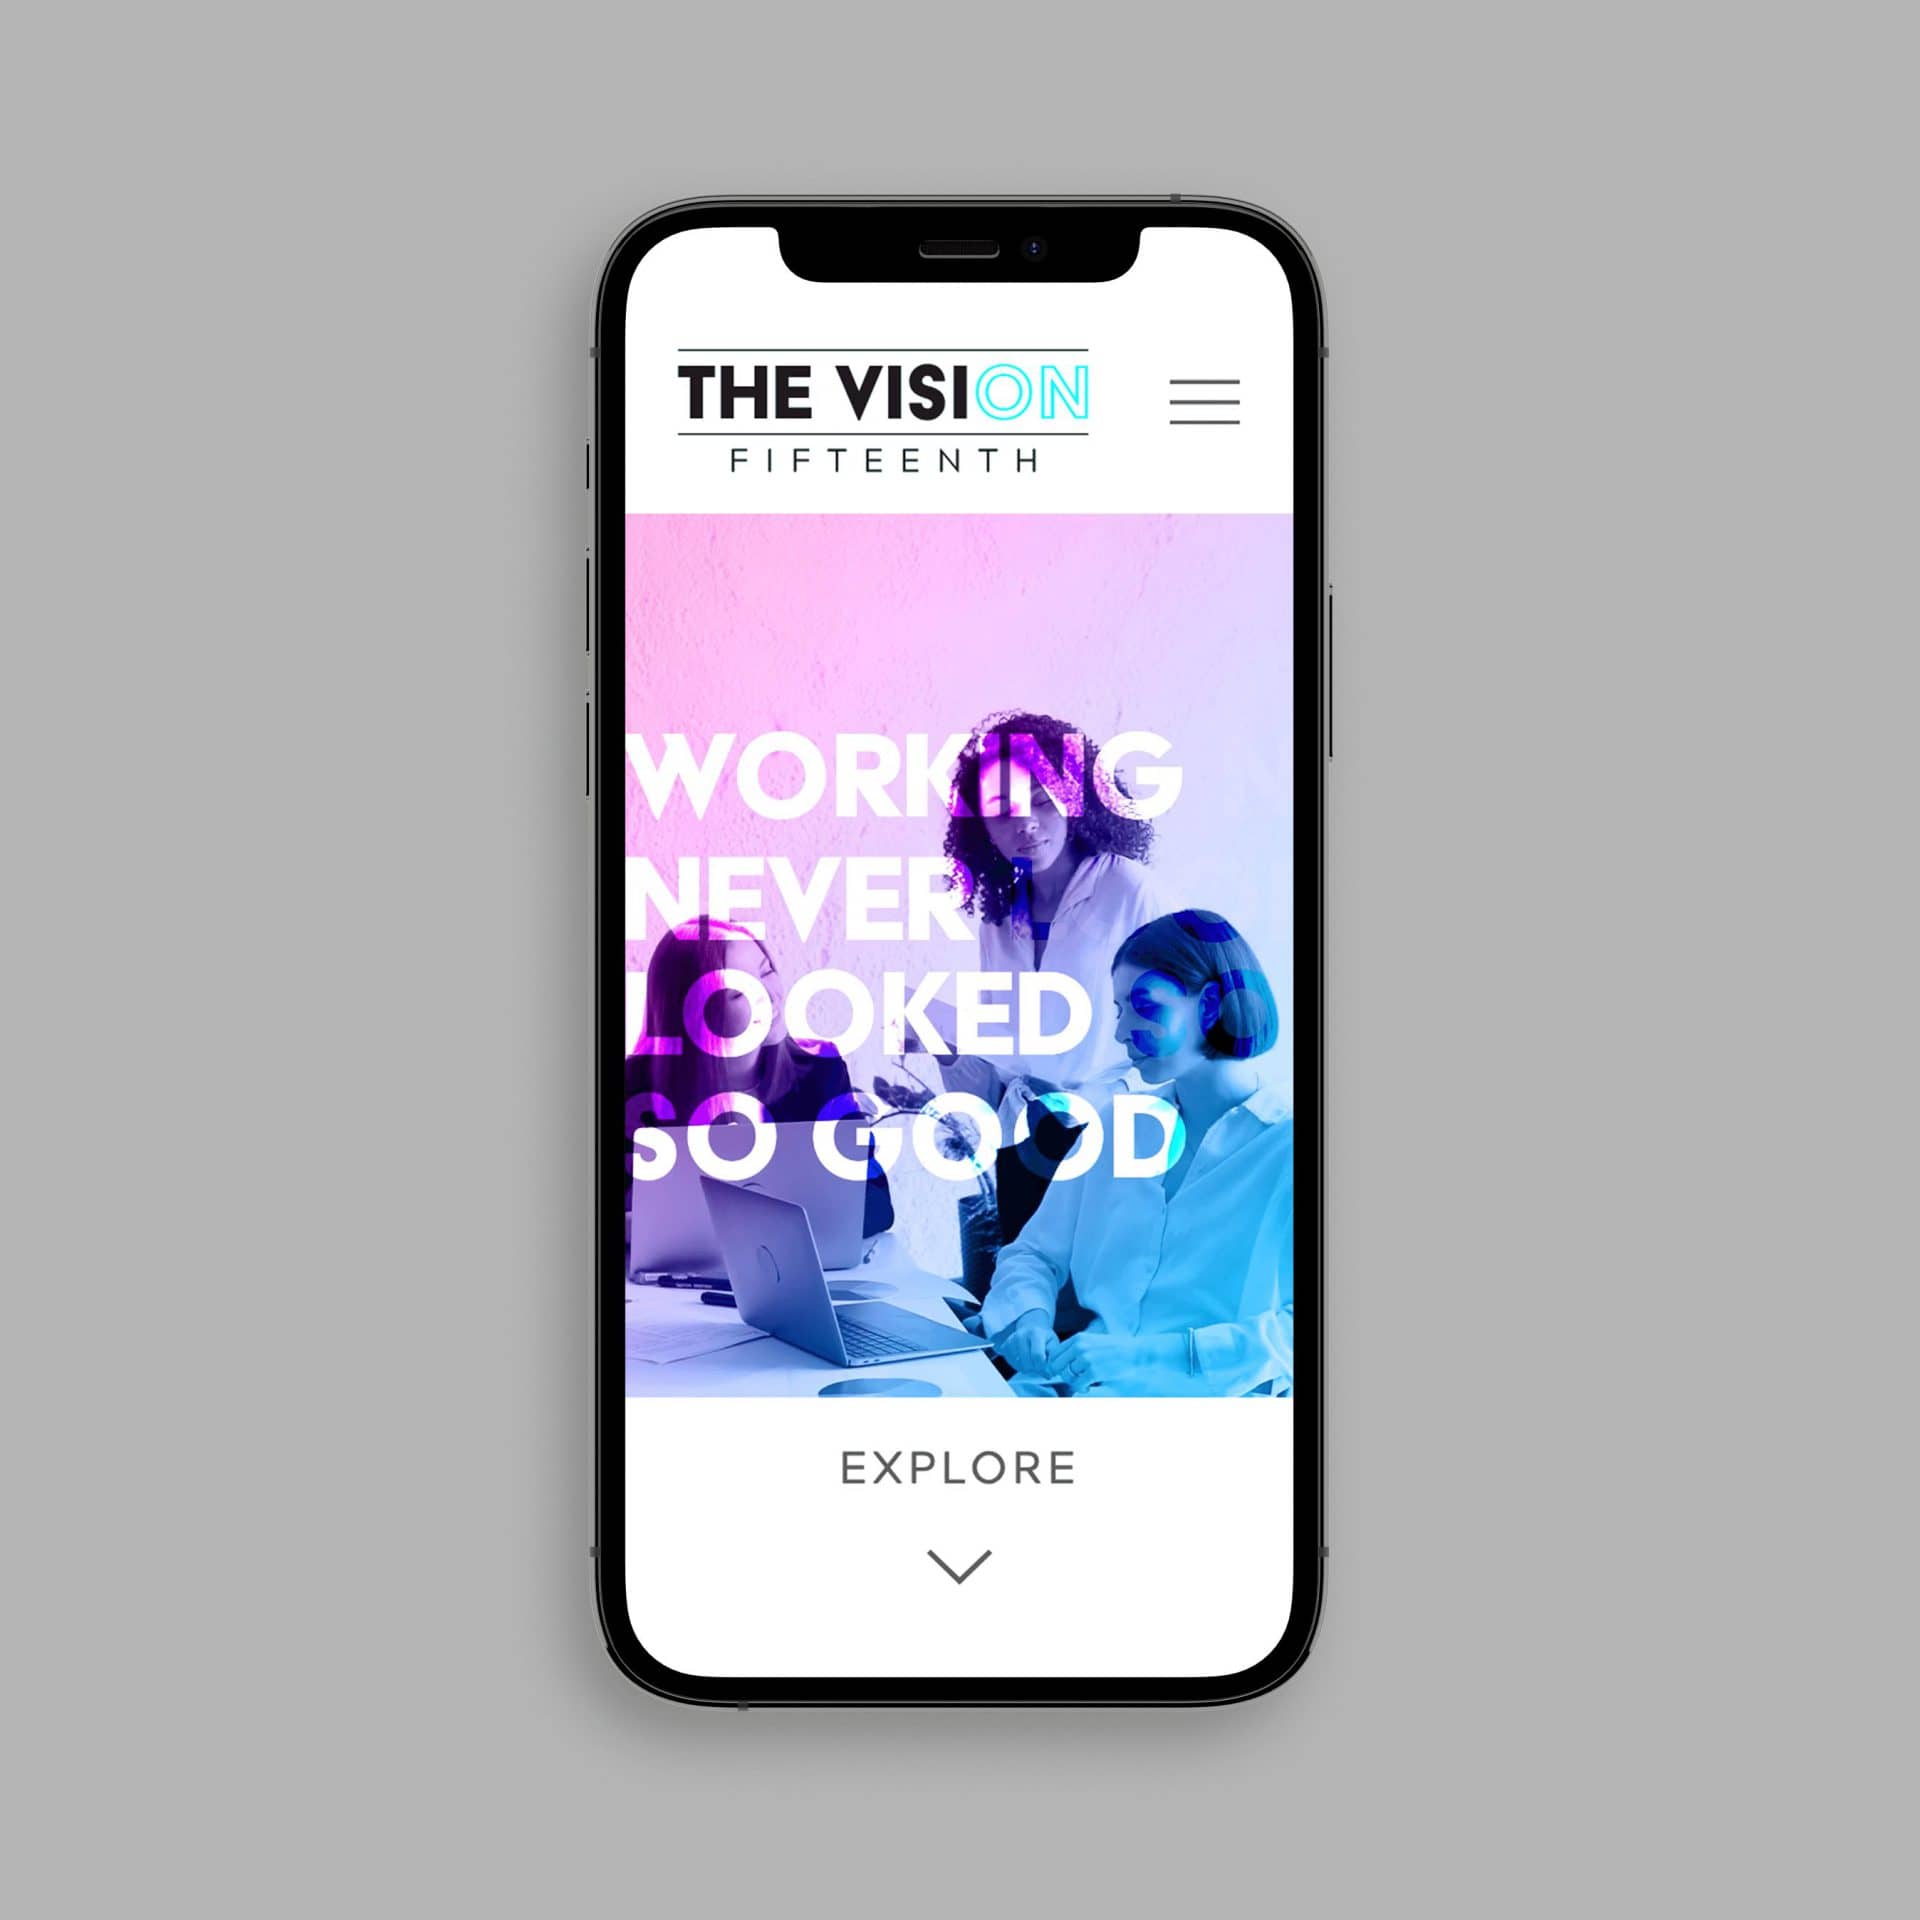 the vision on fifteenth webpage displayed on a smartphone